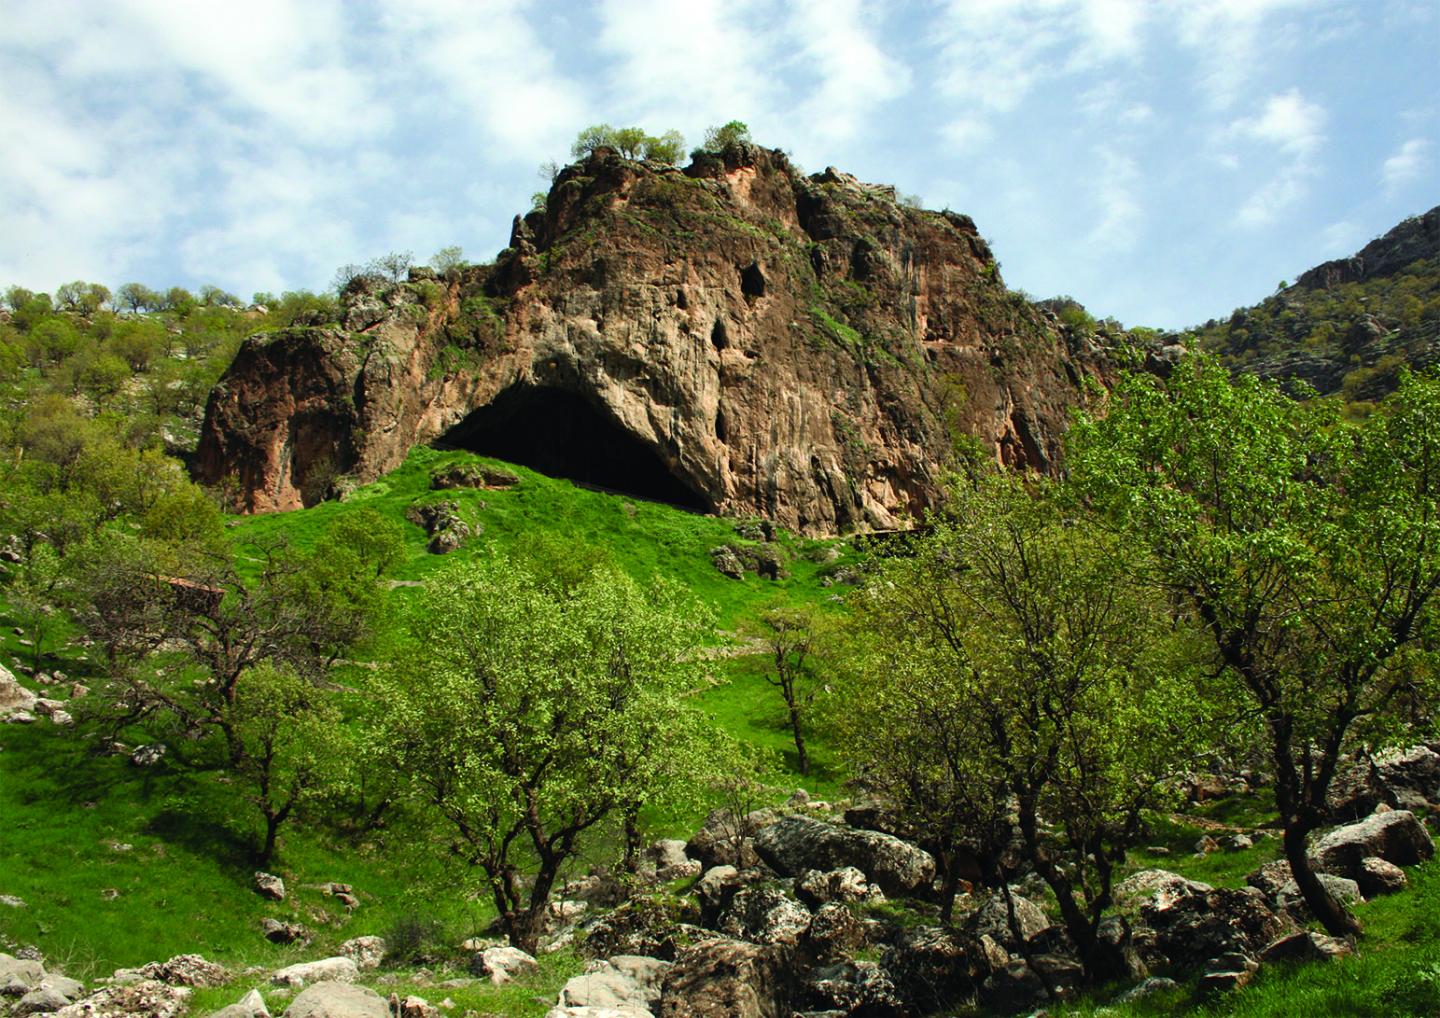 View of the Entrance to Shanidar Cave